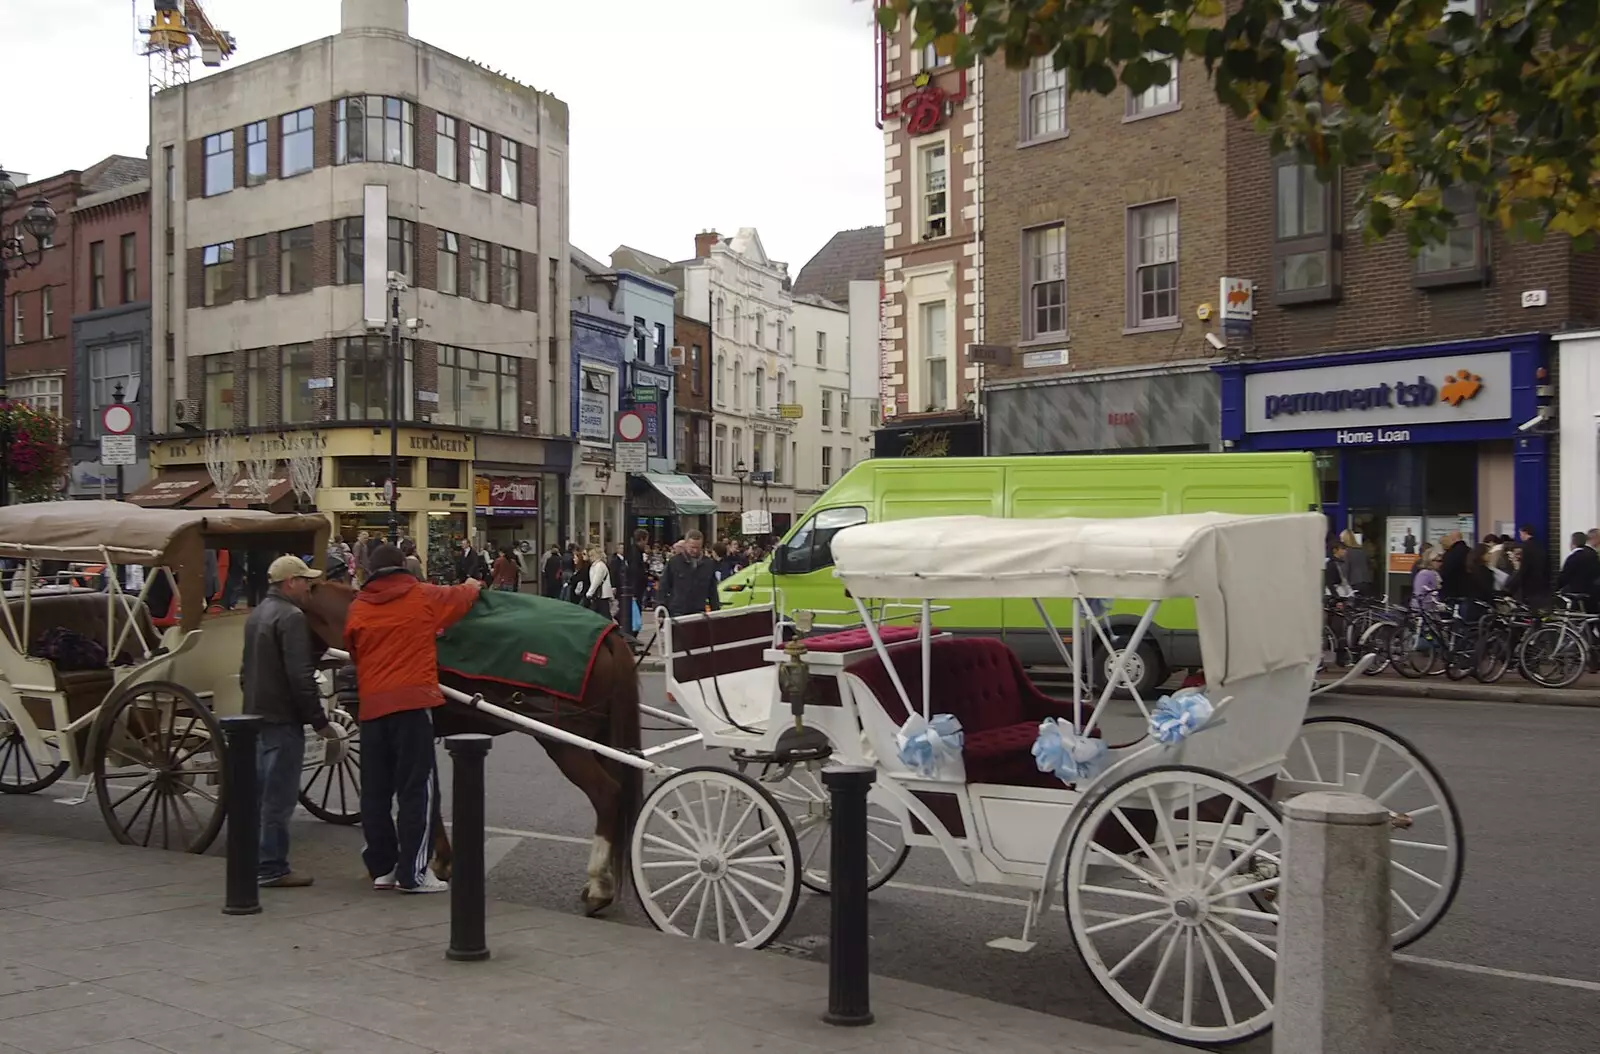 Horses and carts wait near the end of Grafton Street, from Blackrock and Dublin, Ireland - 24th September 2007